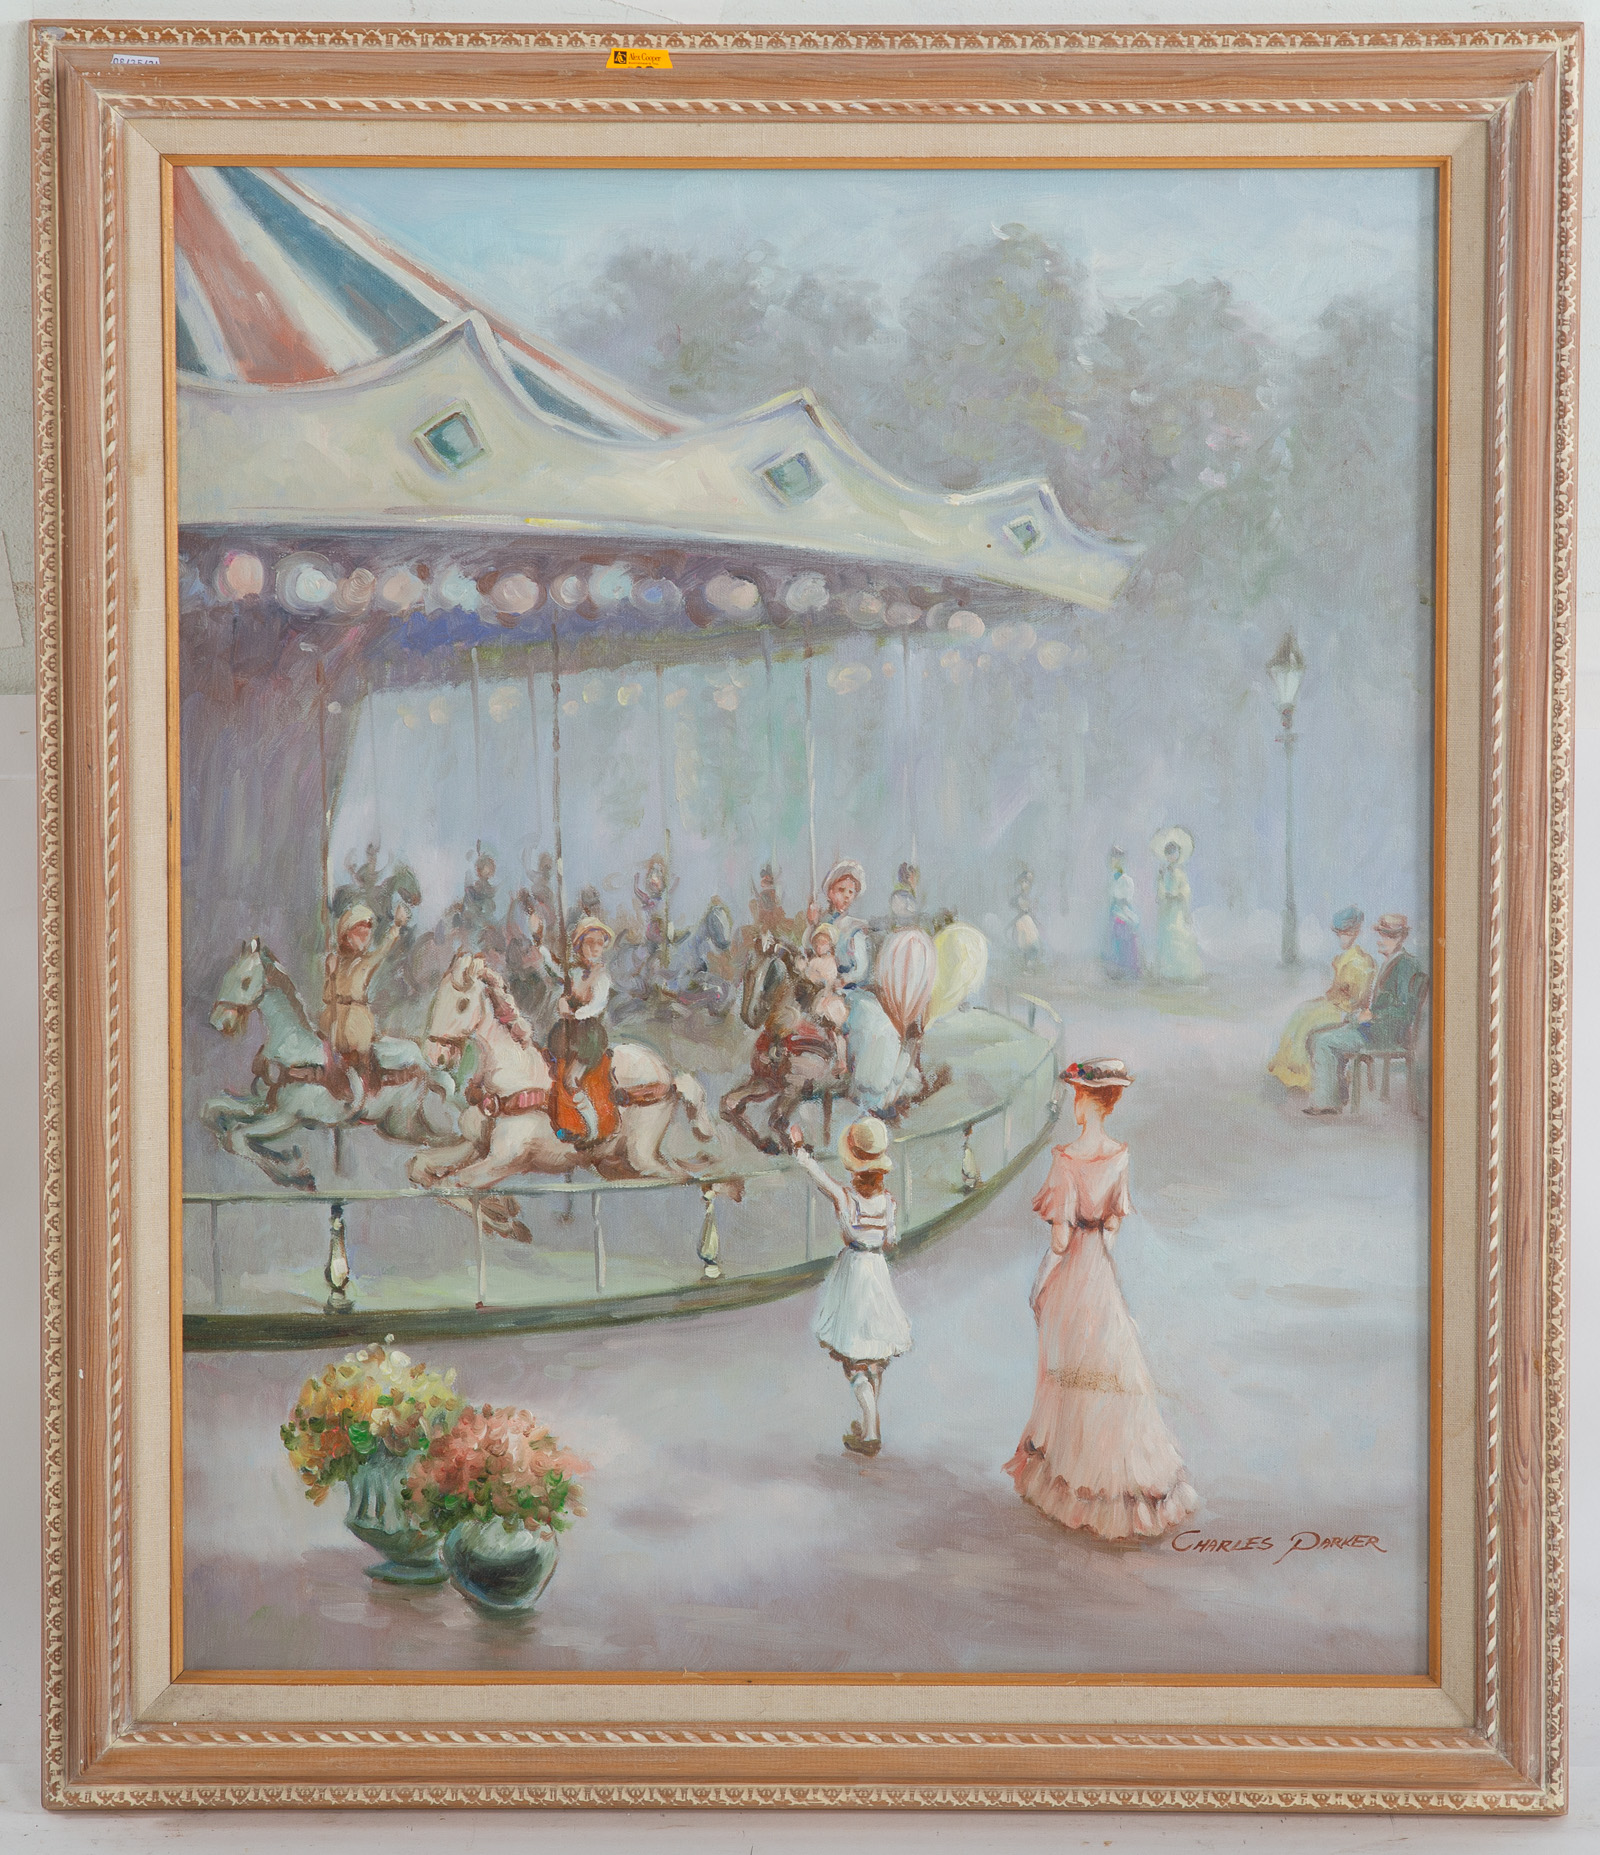 CHARLES PARKER CAROUSEL IN THE 334660